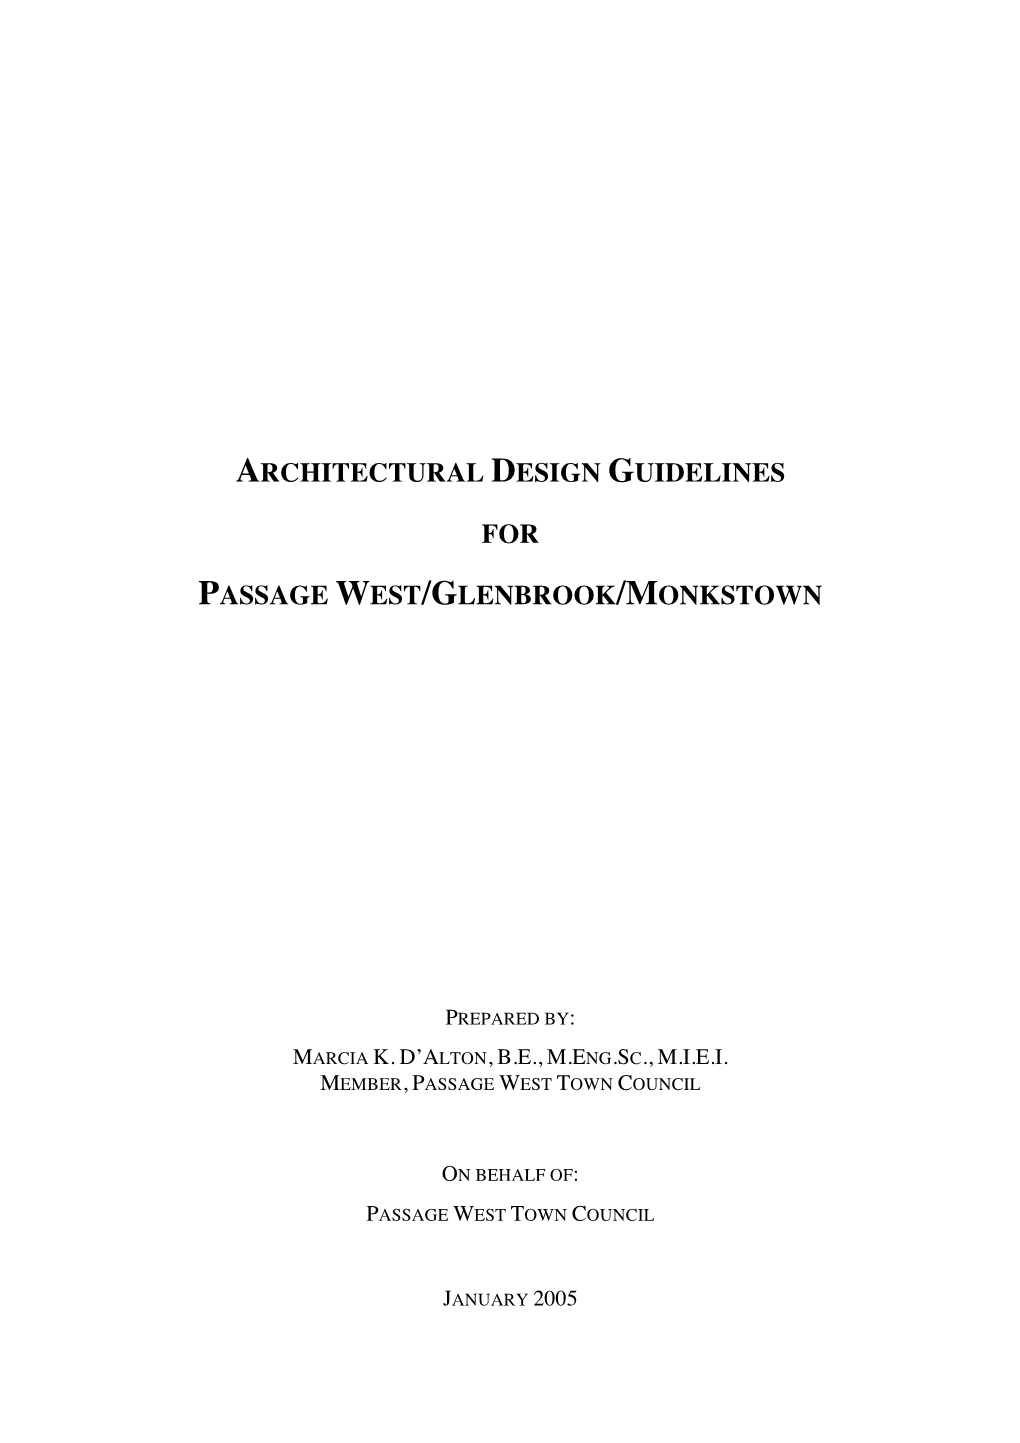 Architectural Design Guidelines for Passage West/Monkstown